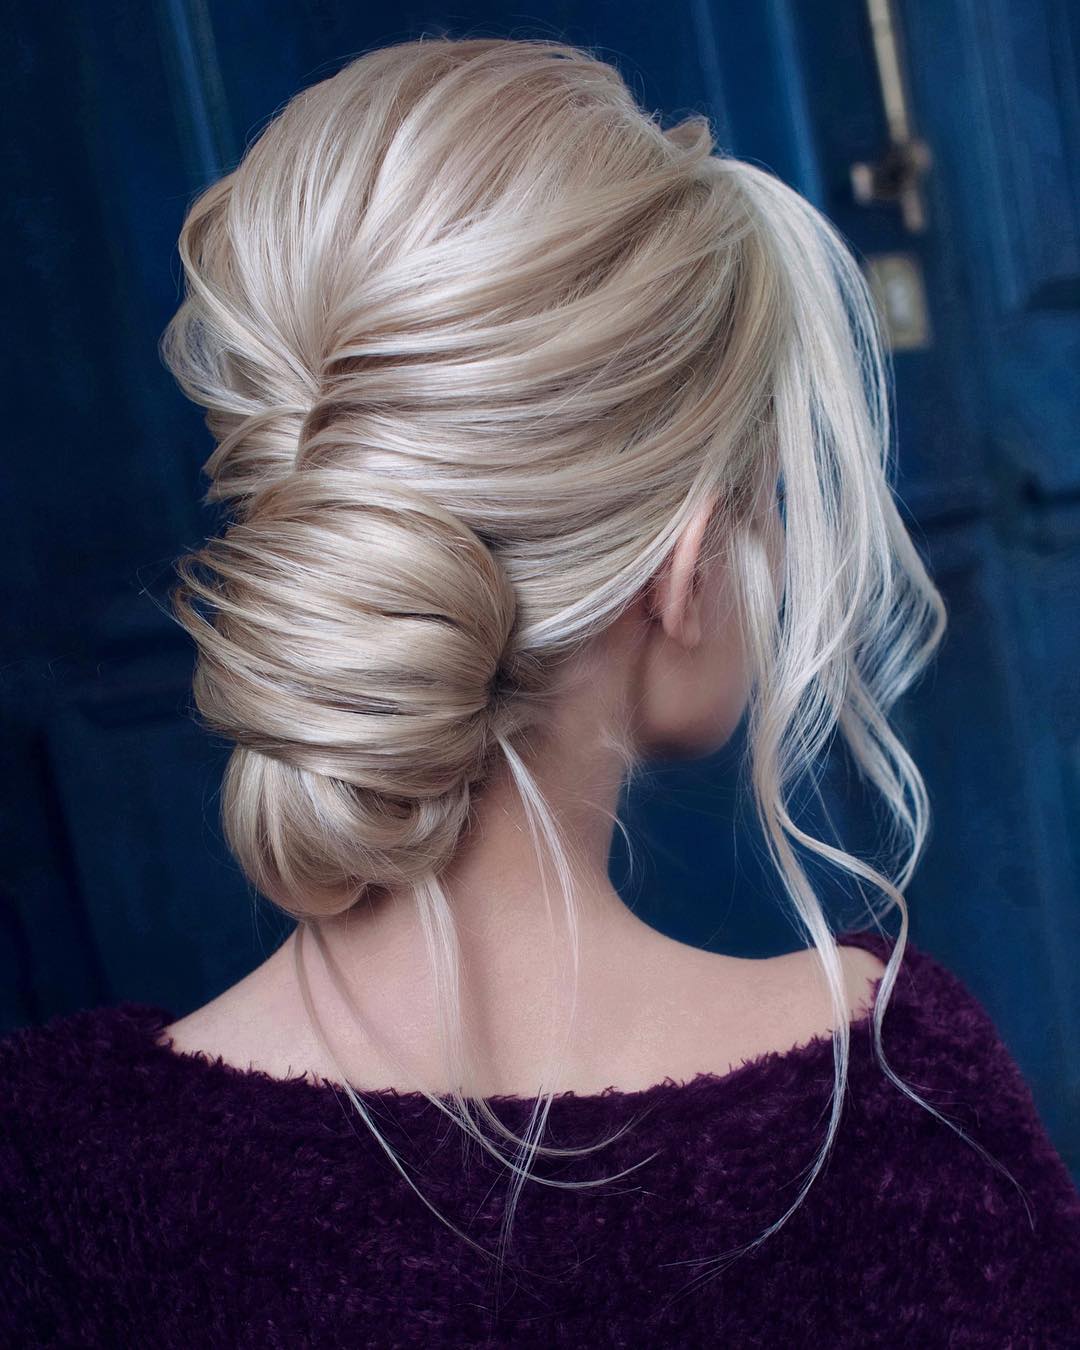 10 Updos for Medium Length Hair - Prom & Homecoming Hairstyle Ideas 2021